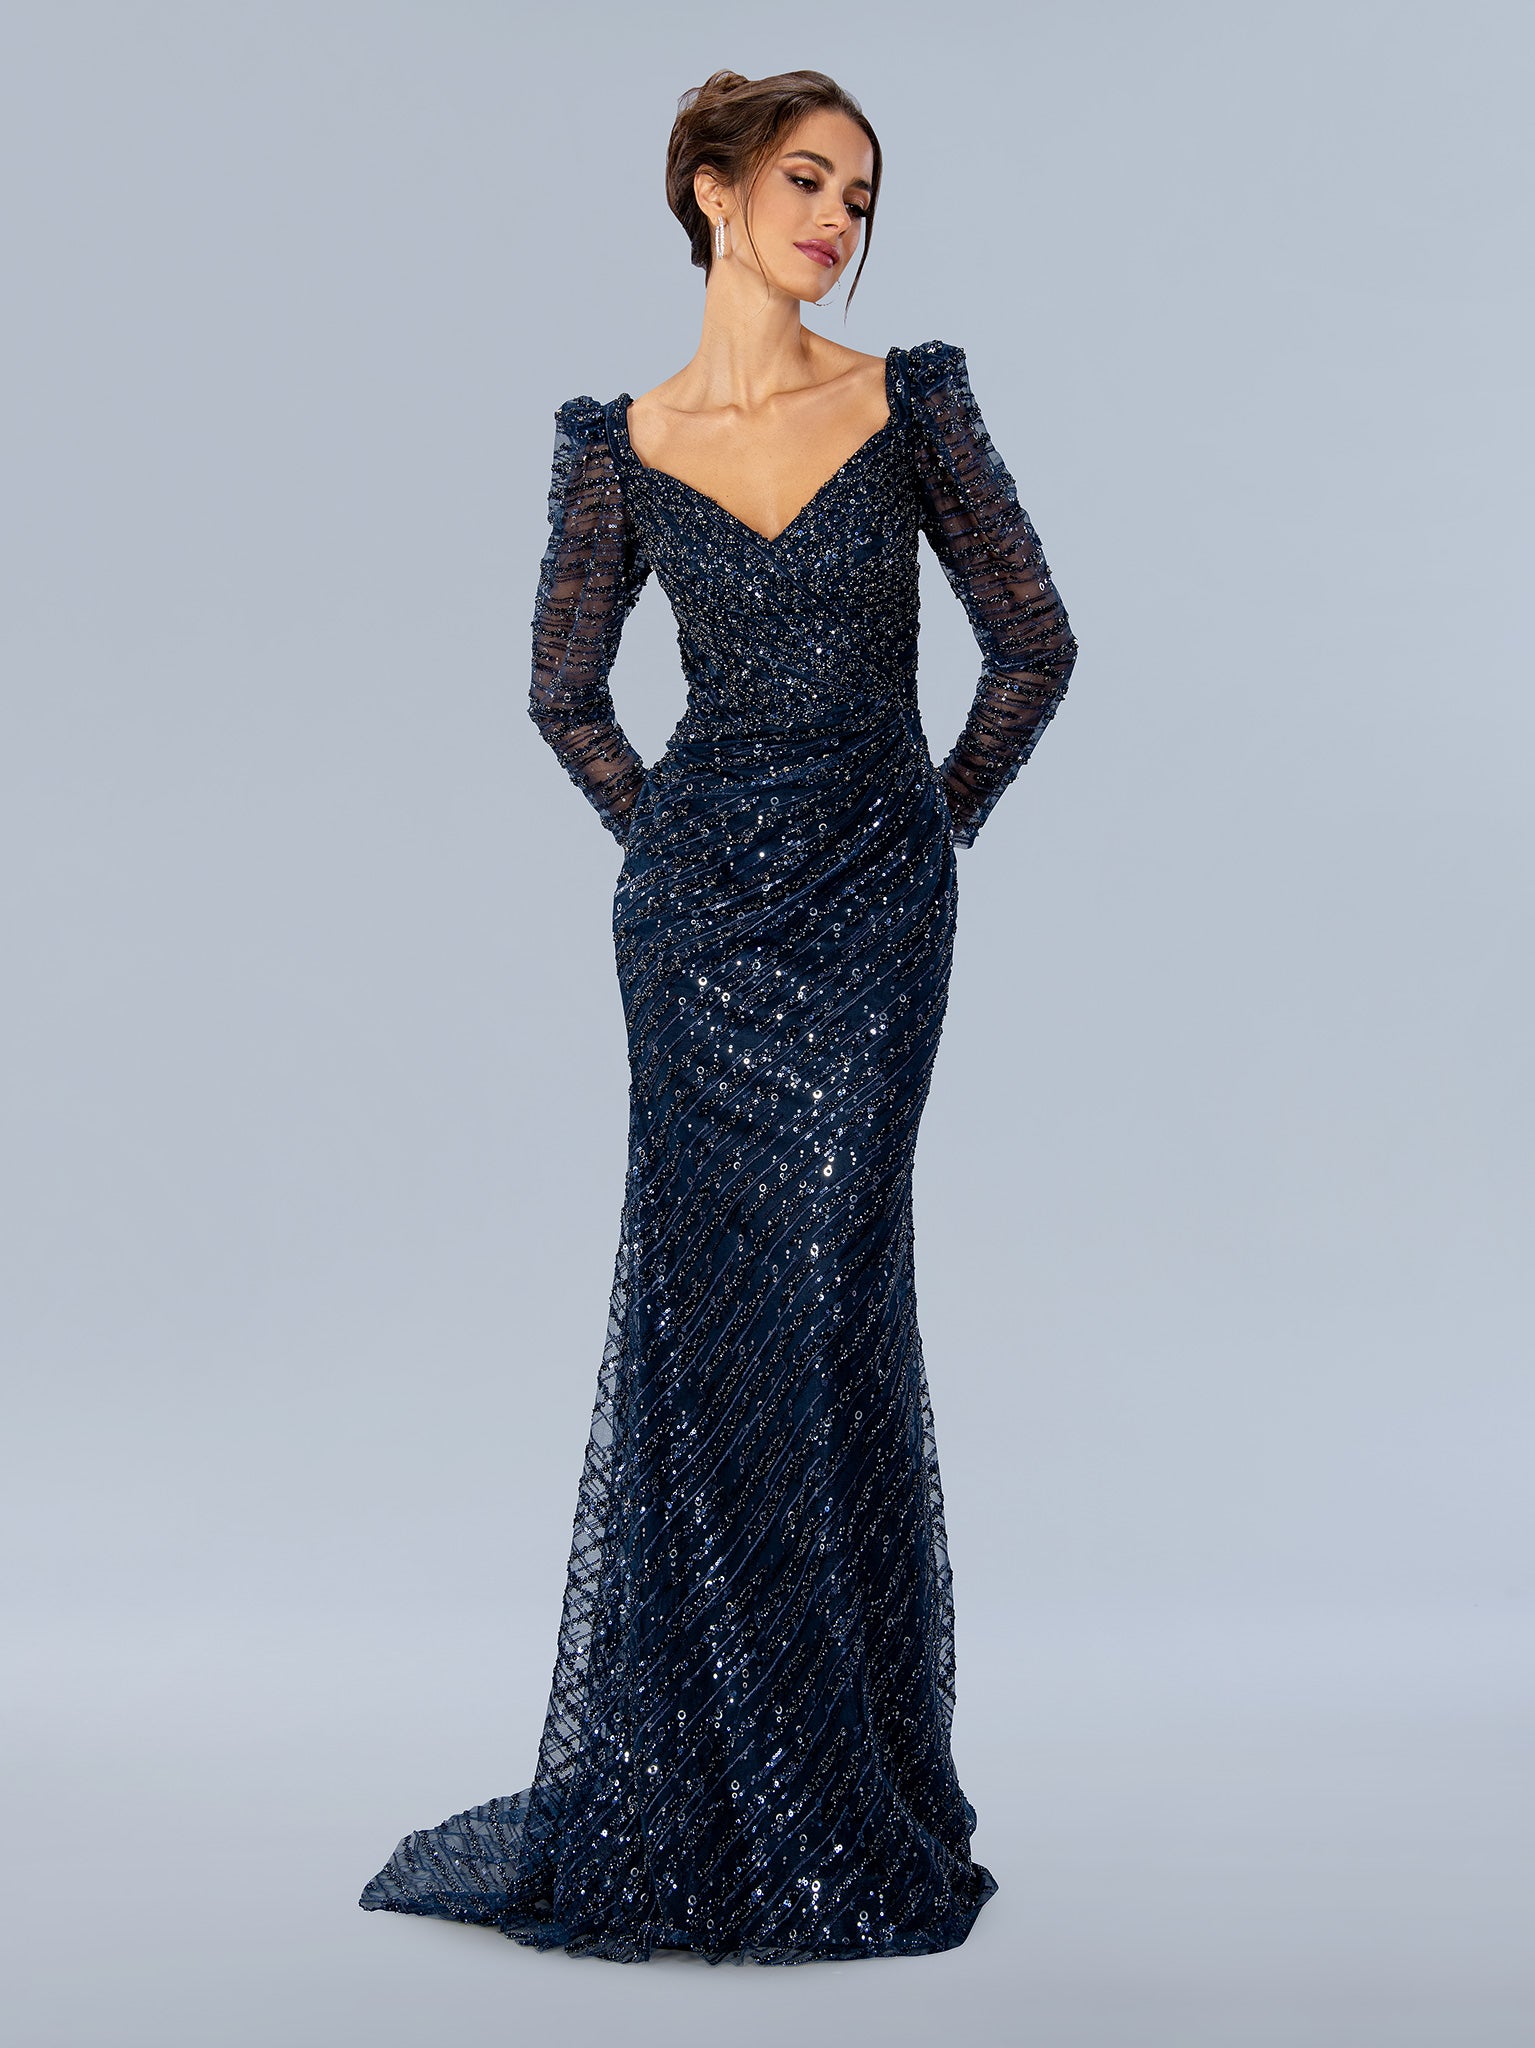 22365 Formal Long Evening Gown Navy